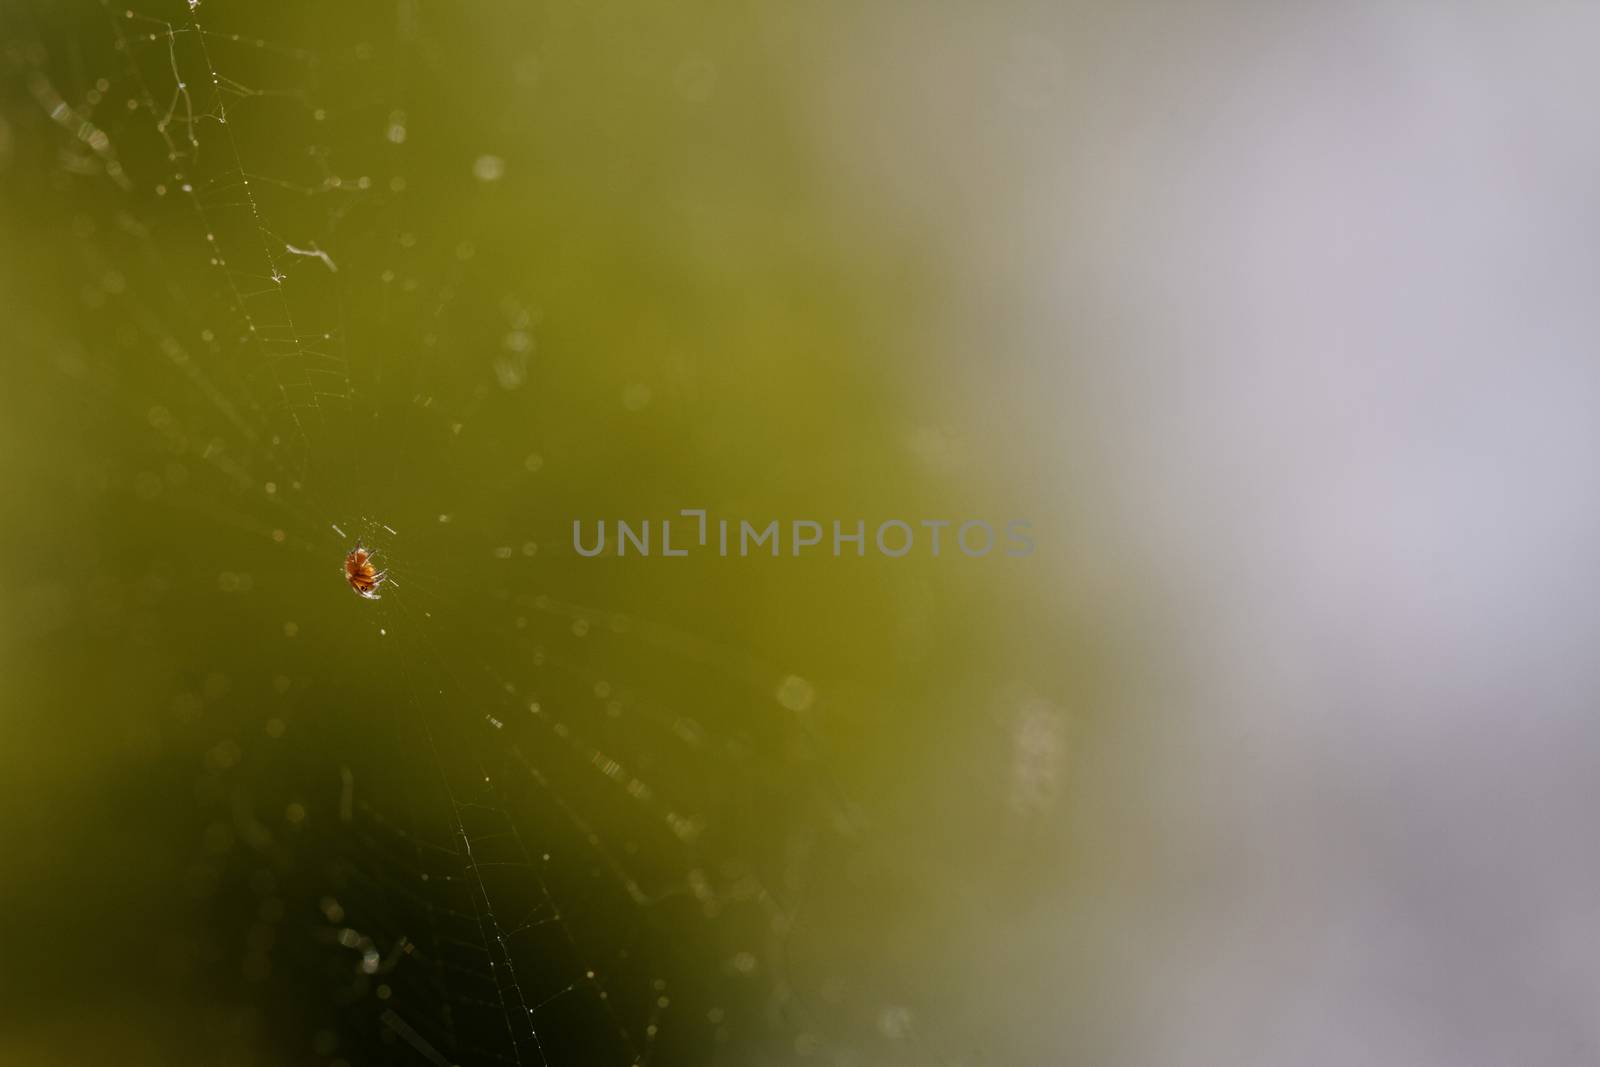 Photo of a small spider in the middle of the cobweb